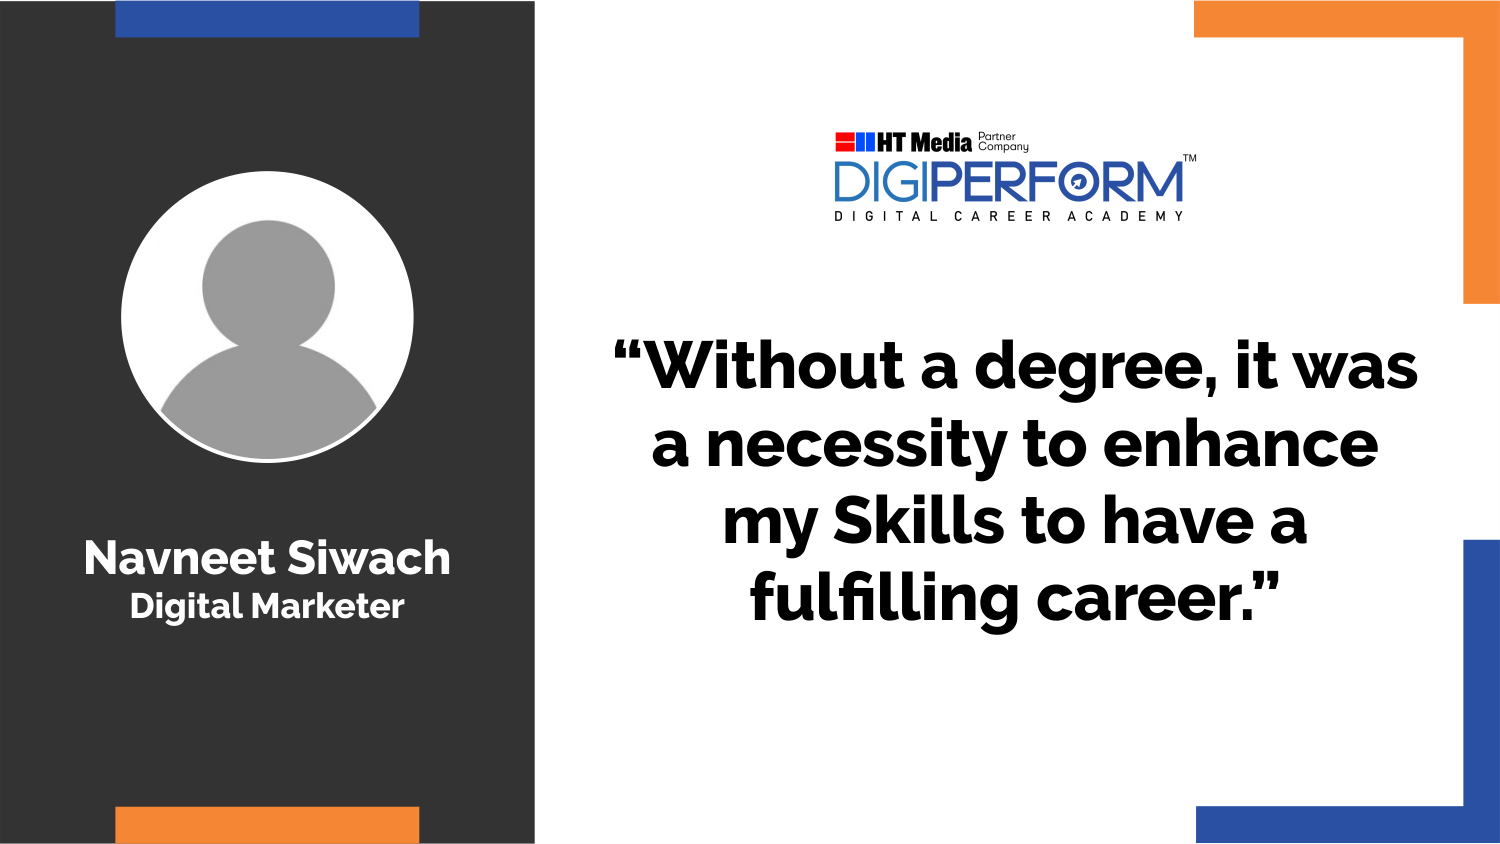 “Without a degree, it was a necessity to enhance my Skills to have a fulfilling career.” – Navneet Siwach